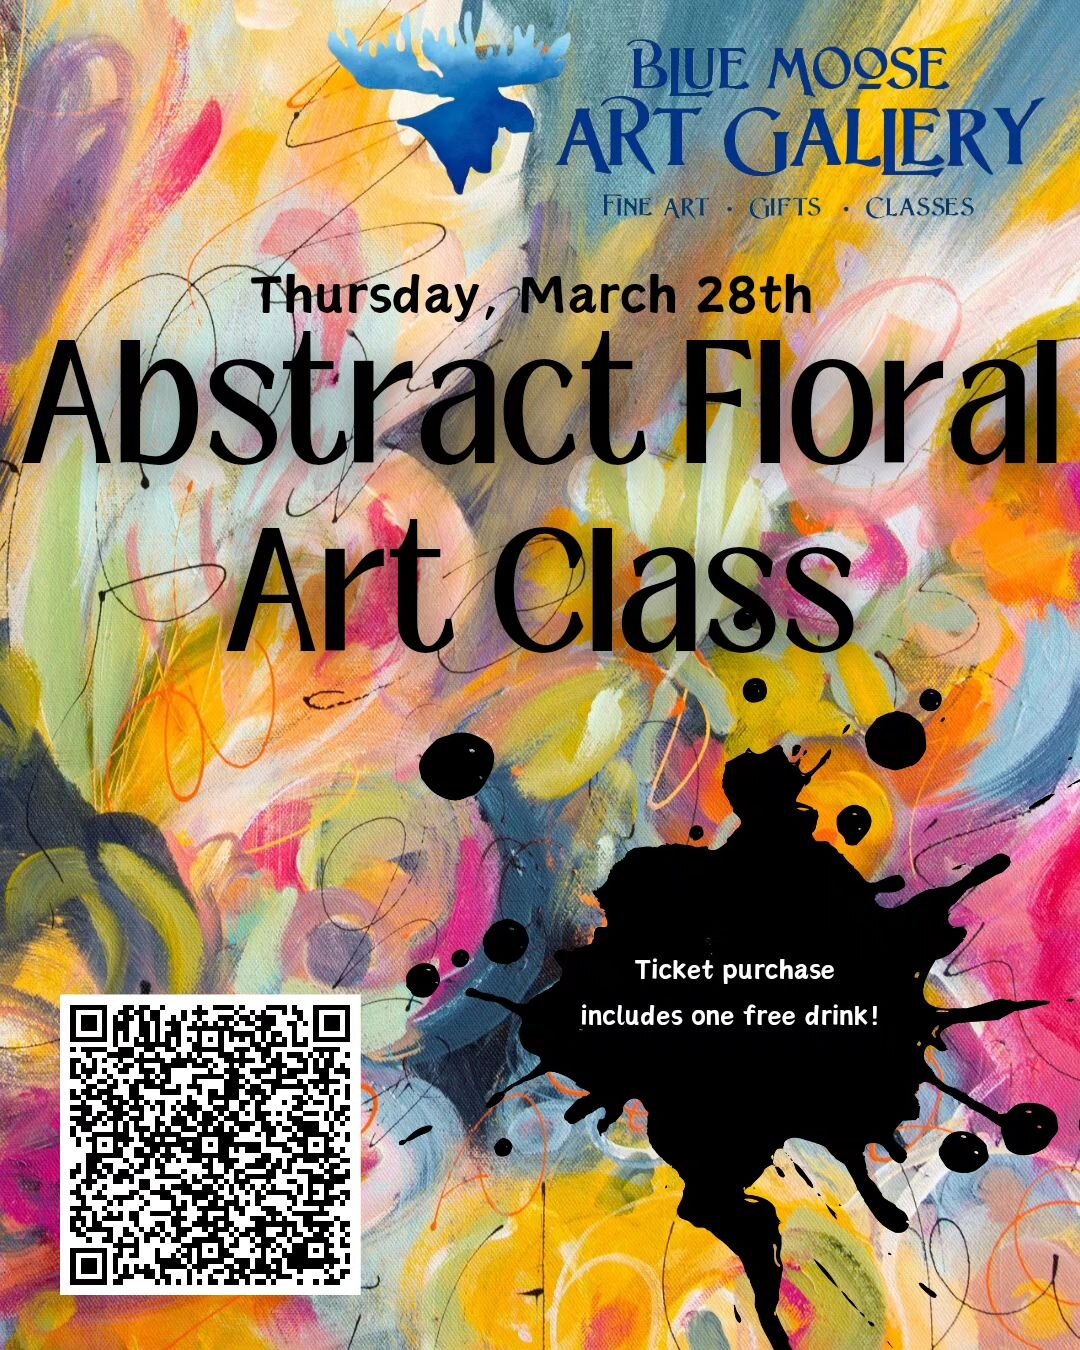 We have another fantastic art class presented by Blue Moose Art Gallery! 

Thursday March 28th, 2024 from 6:00 to 8:00 

Are you craving flowers and color? Do you love to play with paint? This class is perfect for you! Participants will experiment wi